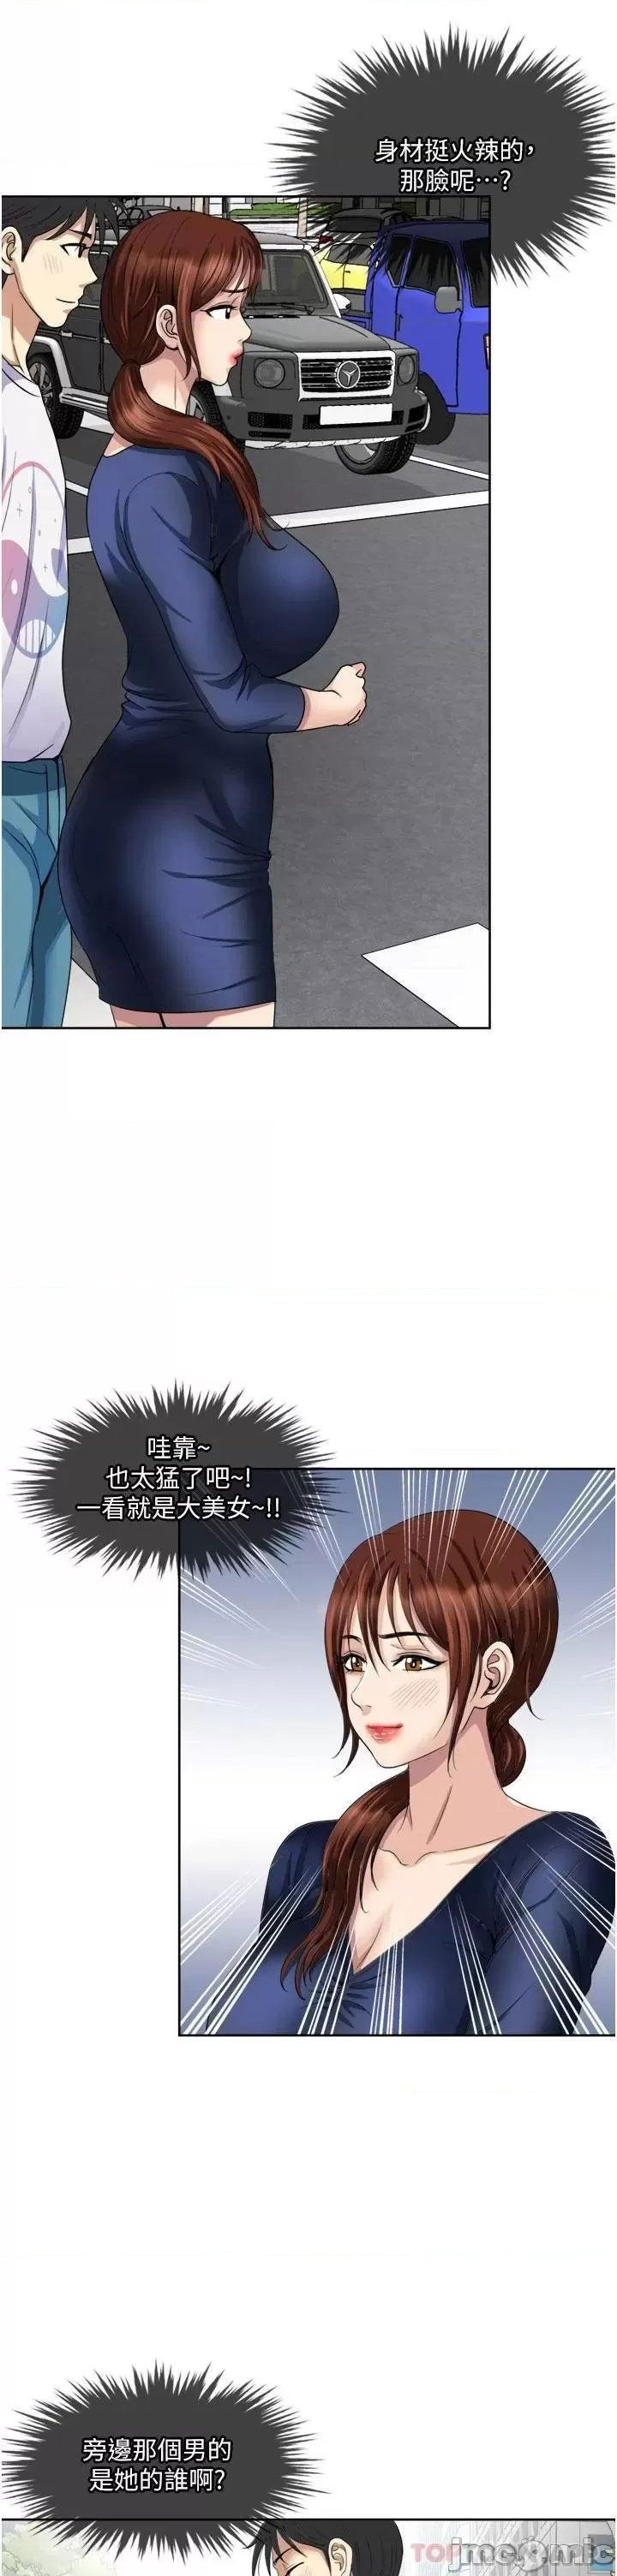 just-once-raw-chap-23-22